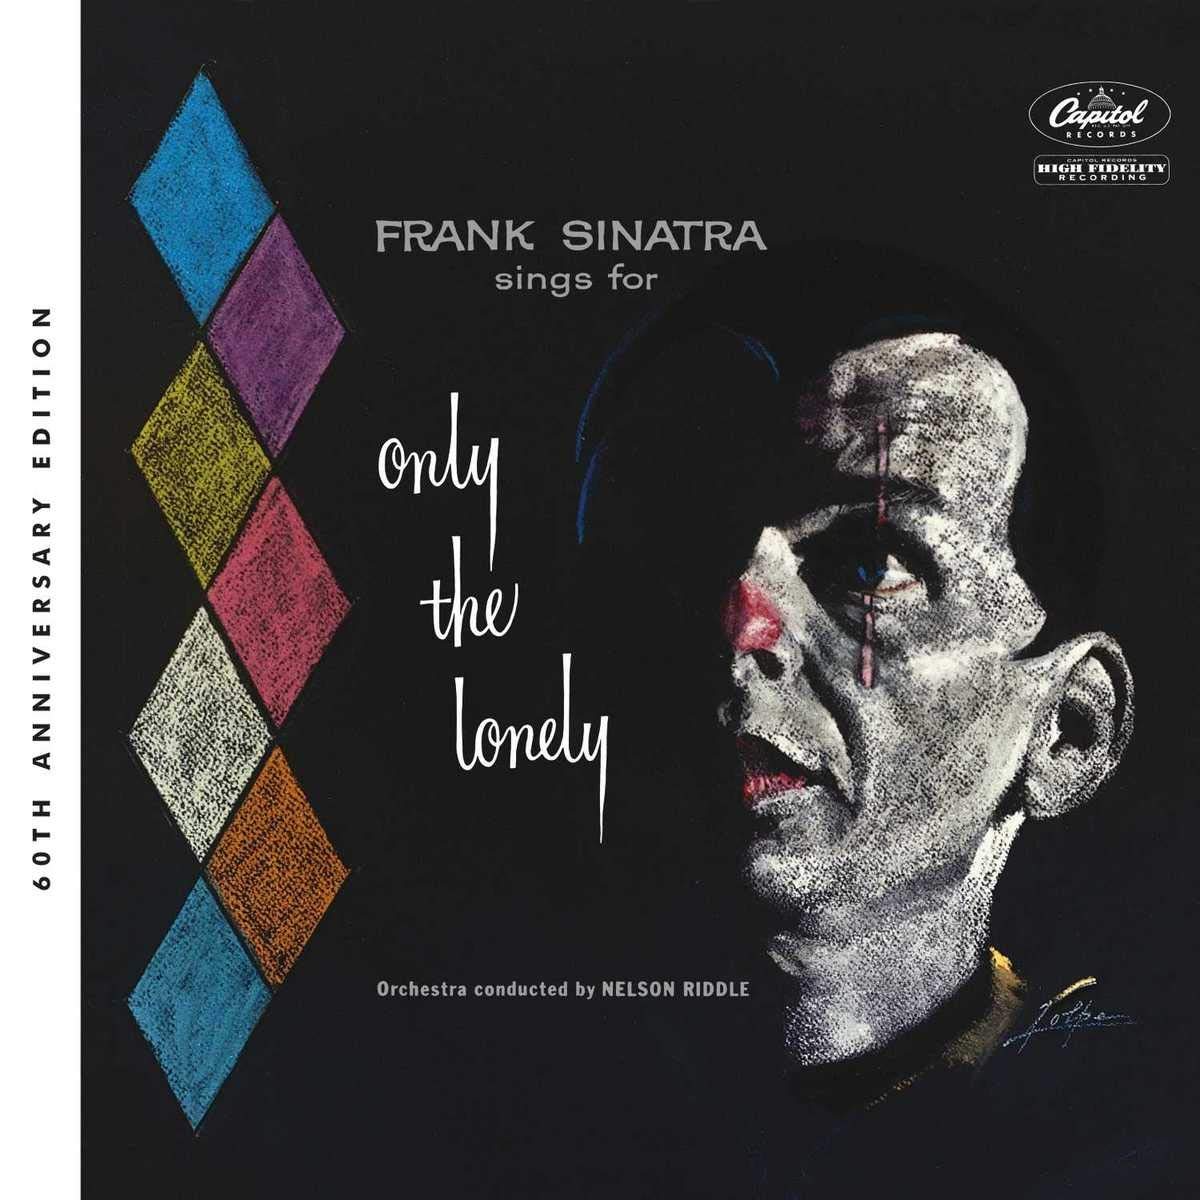 Frank Sinatra - Only For The Lonely (60th Anniversary Edition)